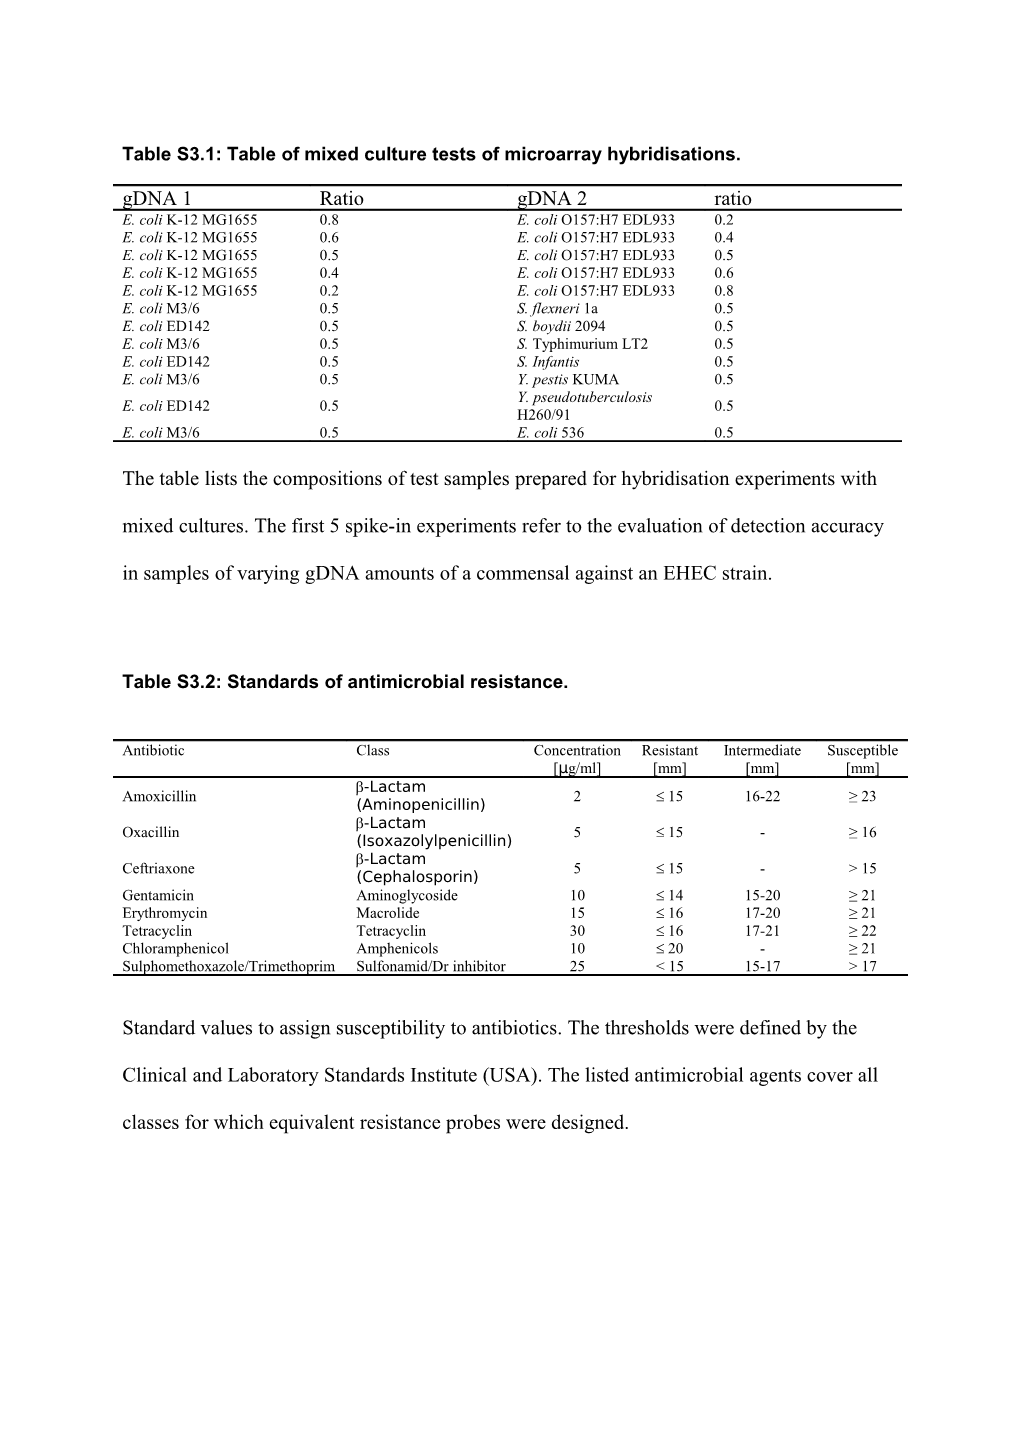 Table S3.1: Table of Mixed Culture Tests of Microarray Hybridisations s1